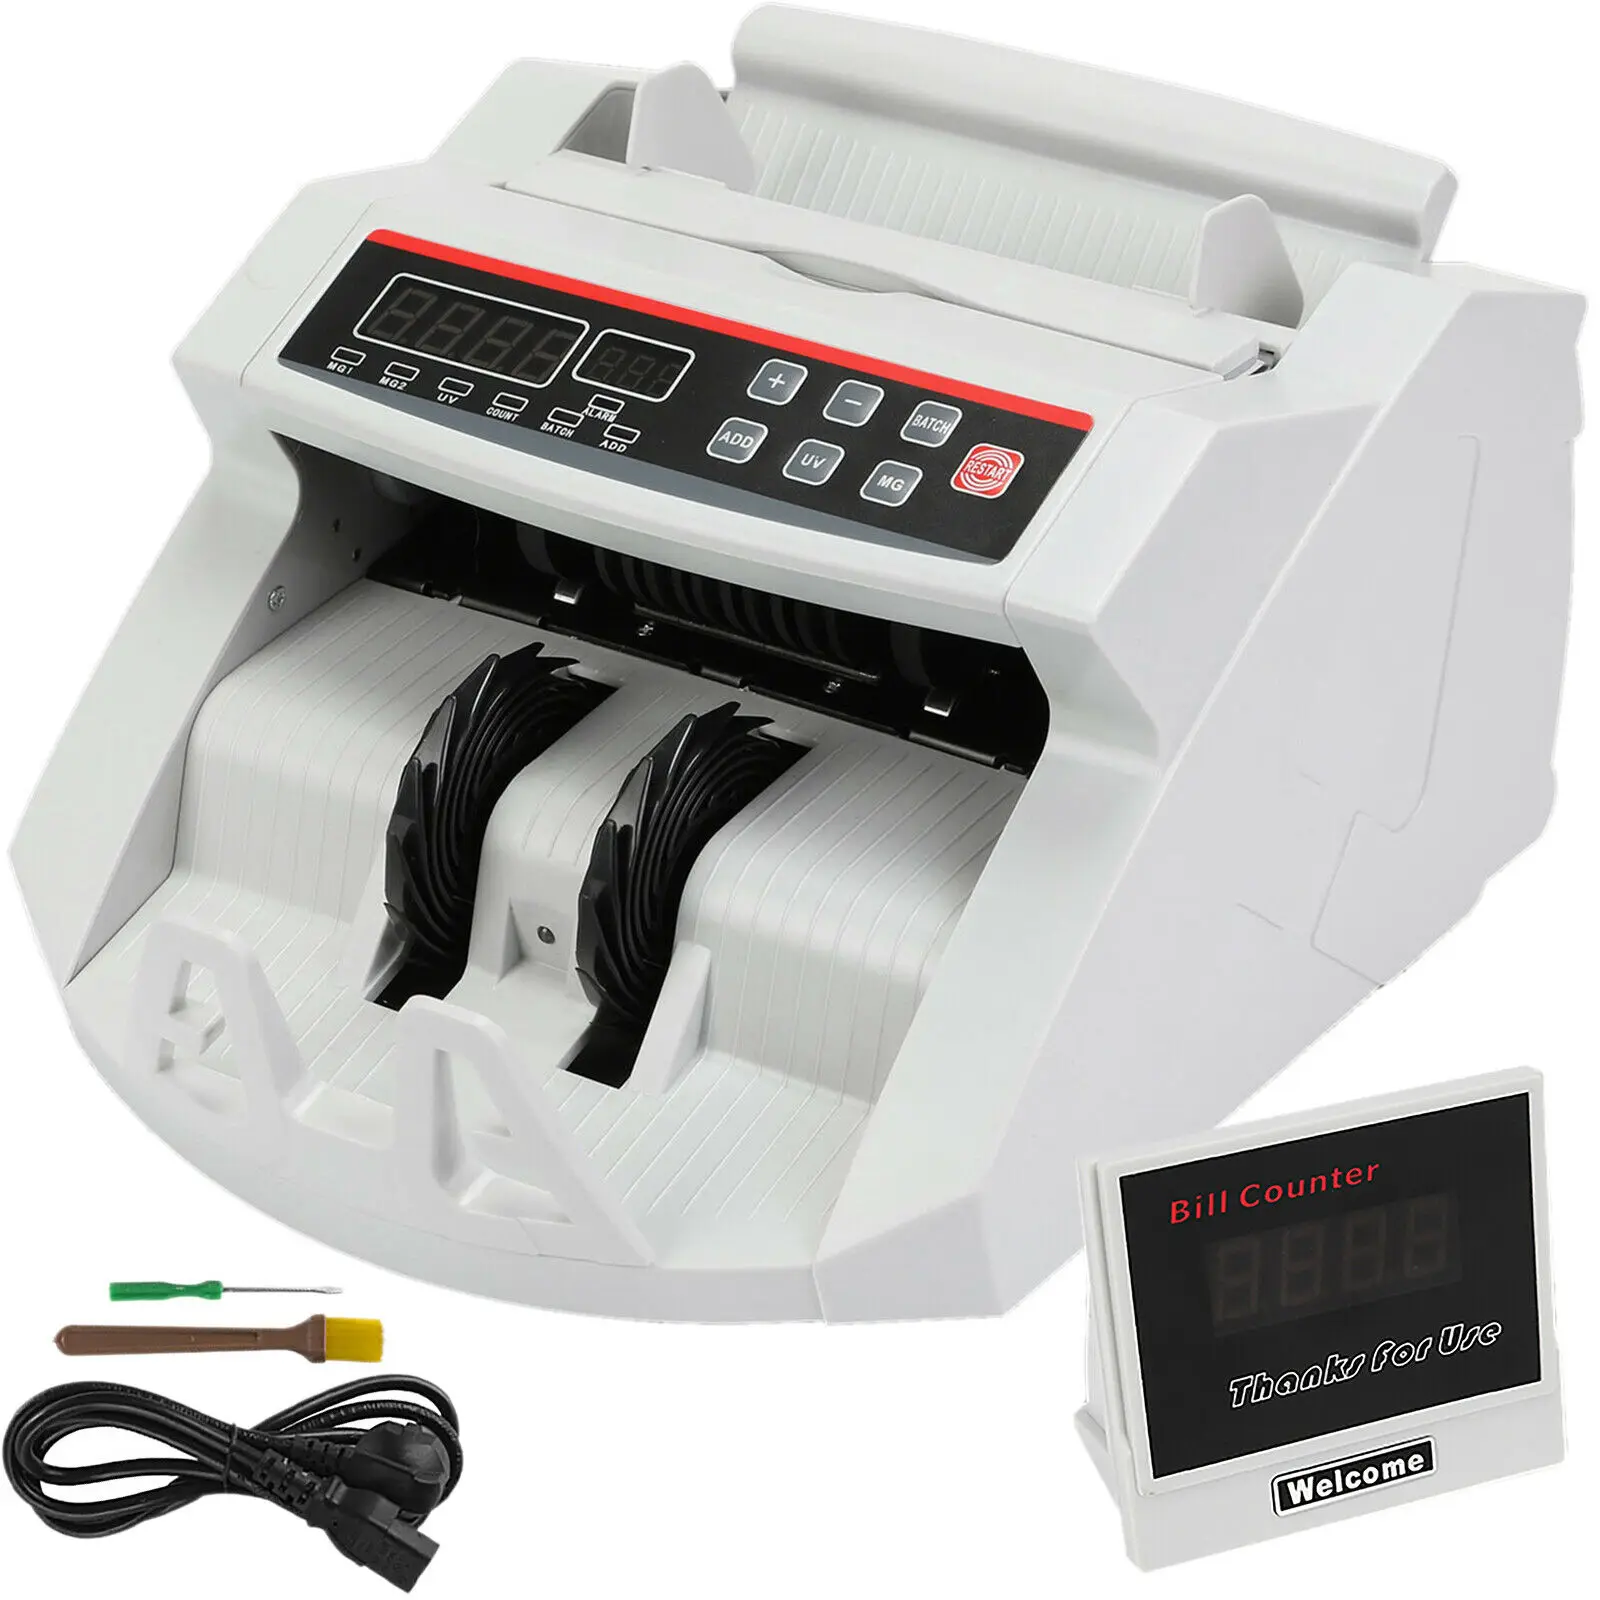 

VEVOR Money Bill Counter 1000 PCS/min 80W Currency Cash Counting Machine UV MG Counterfeit Detection with LED Display for Banks